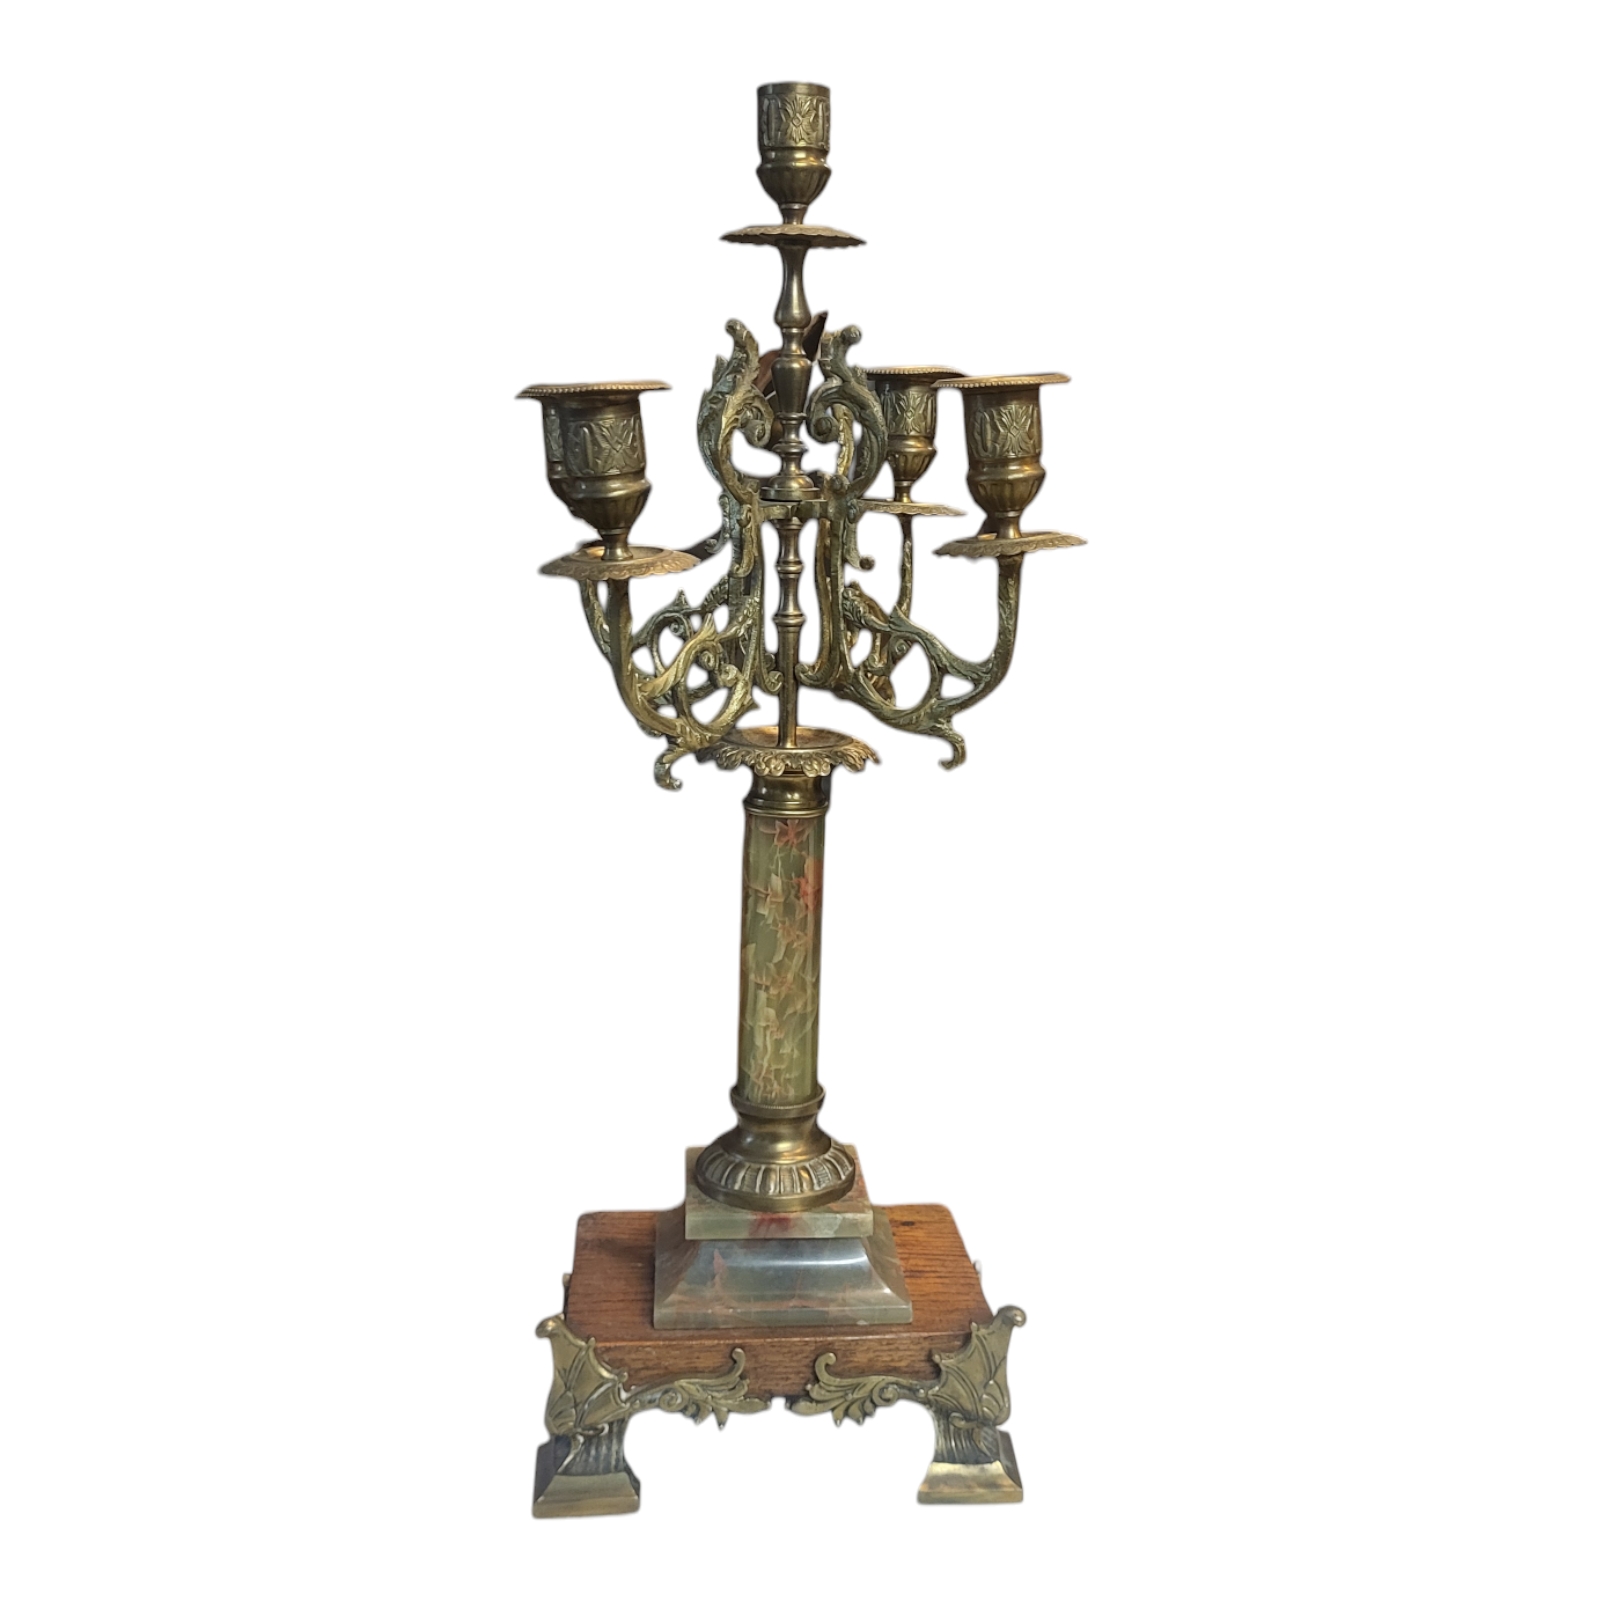 AN EARLY 20TH CENTURY ONYX AND BRASS CANDELABRA Five sconces with scrolled branch arms,onyx column